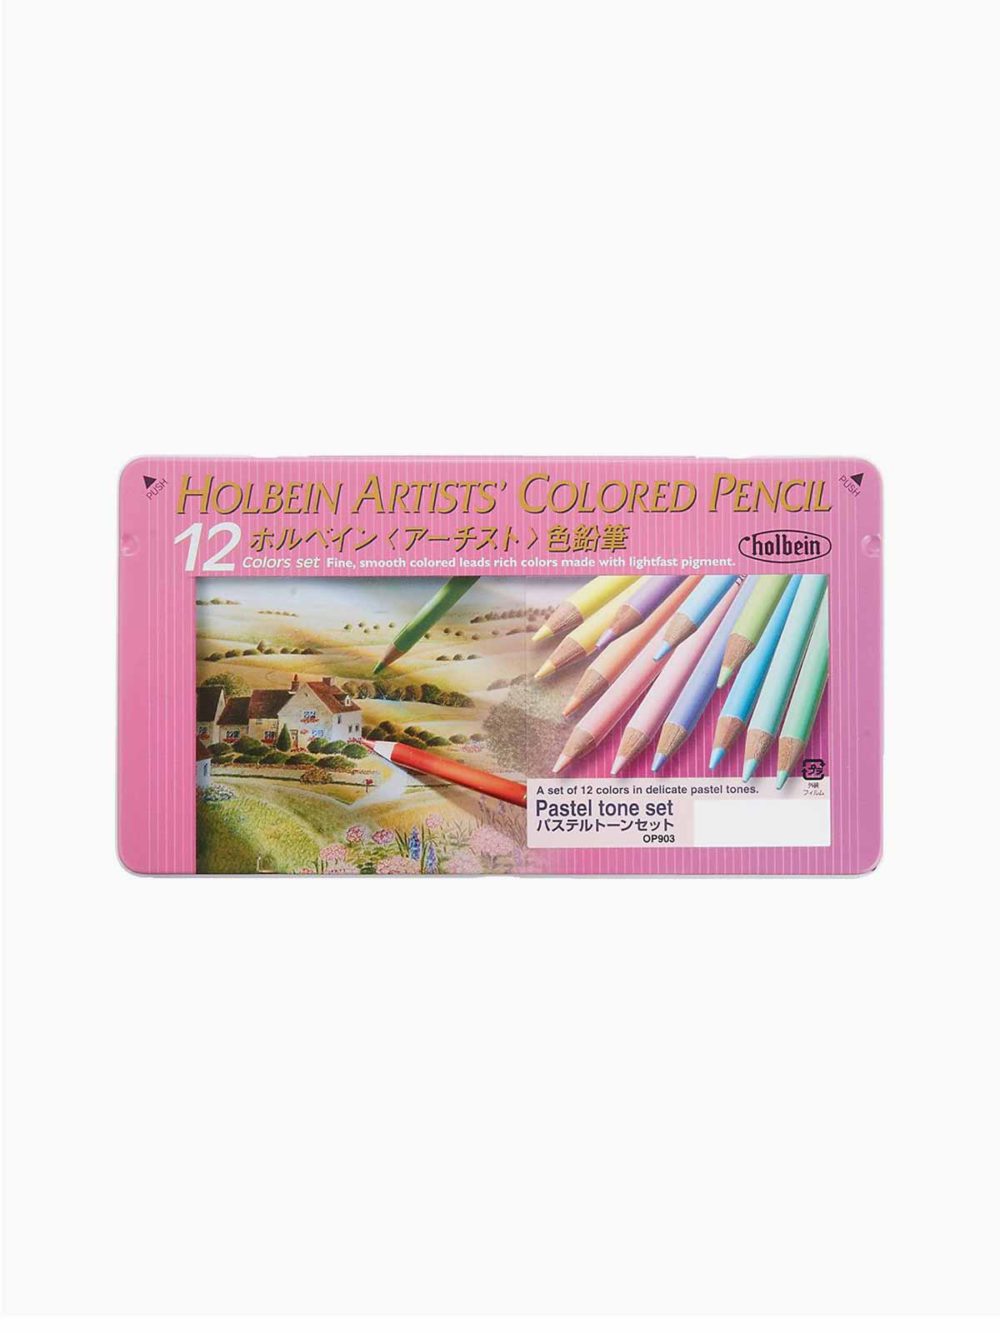 Holbein Pastel Tone Set of 12 Colors